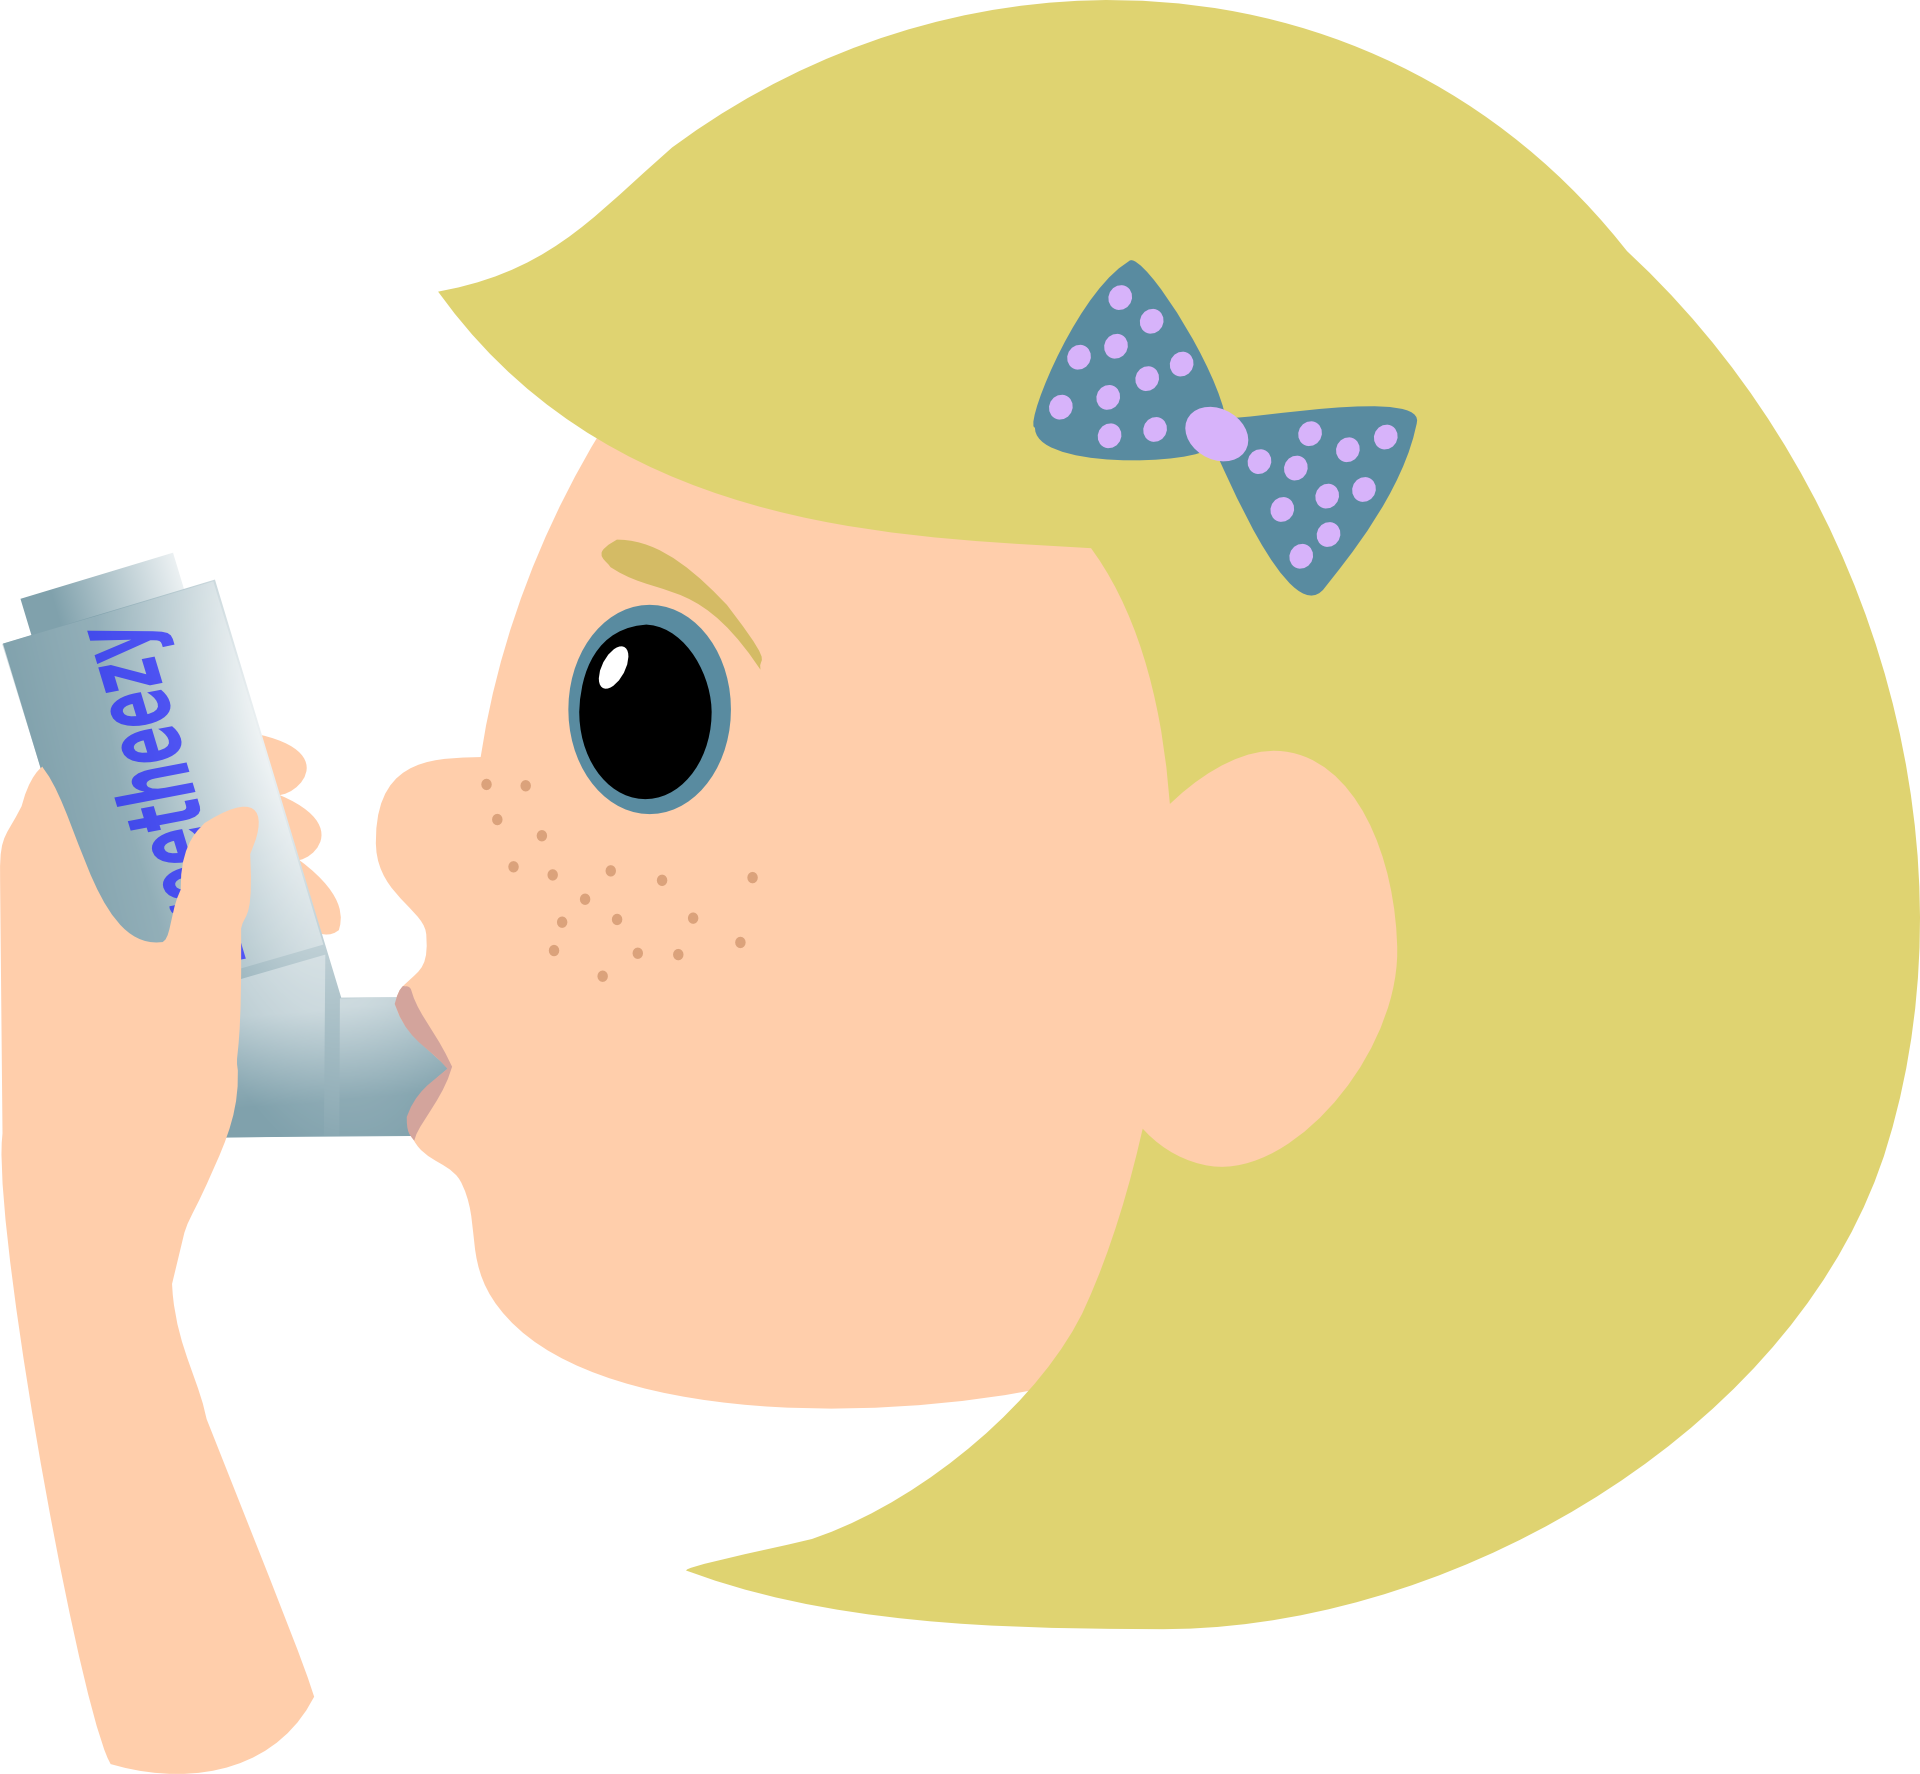 children common illnesses blue-babies asthma and respiratory